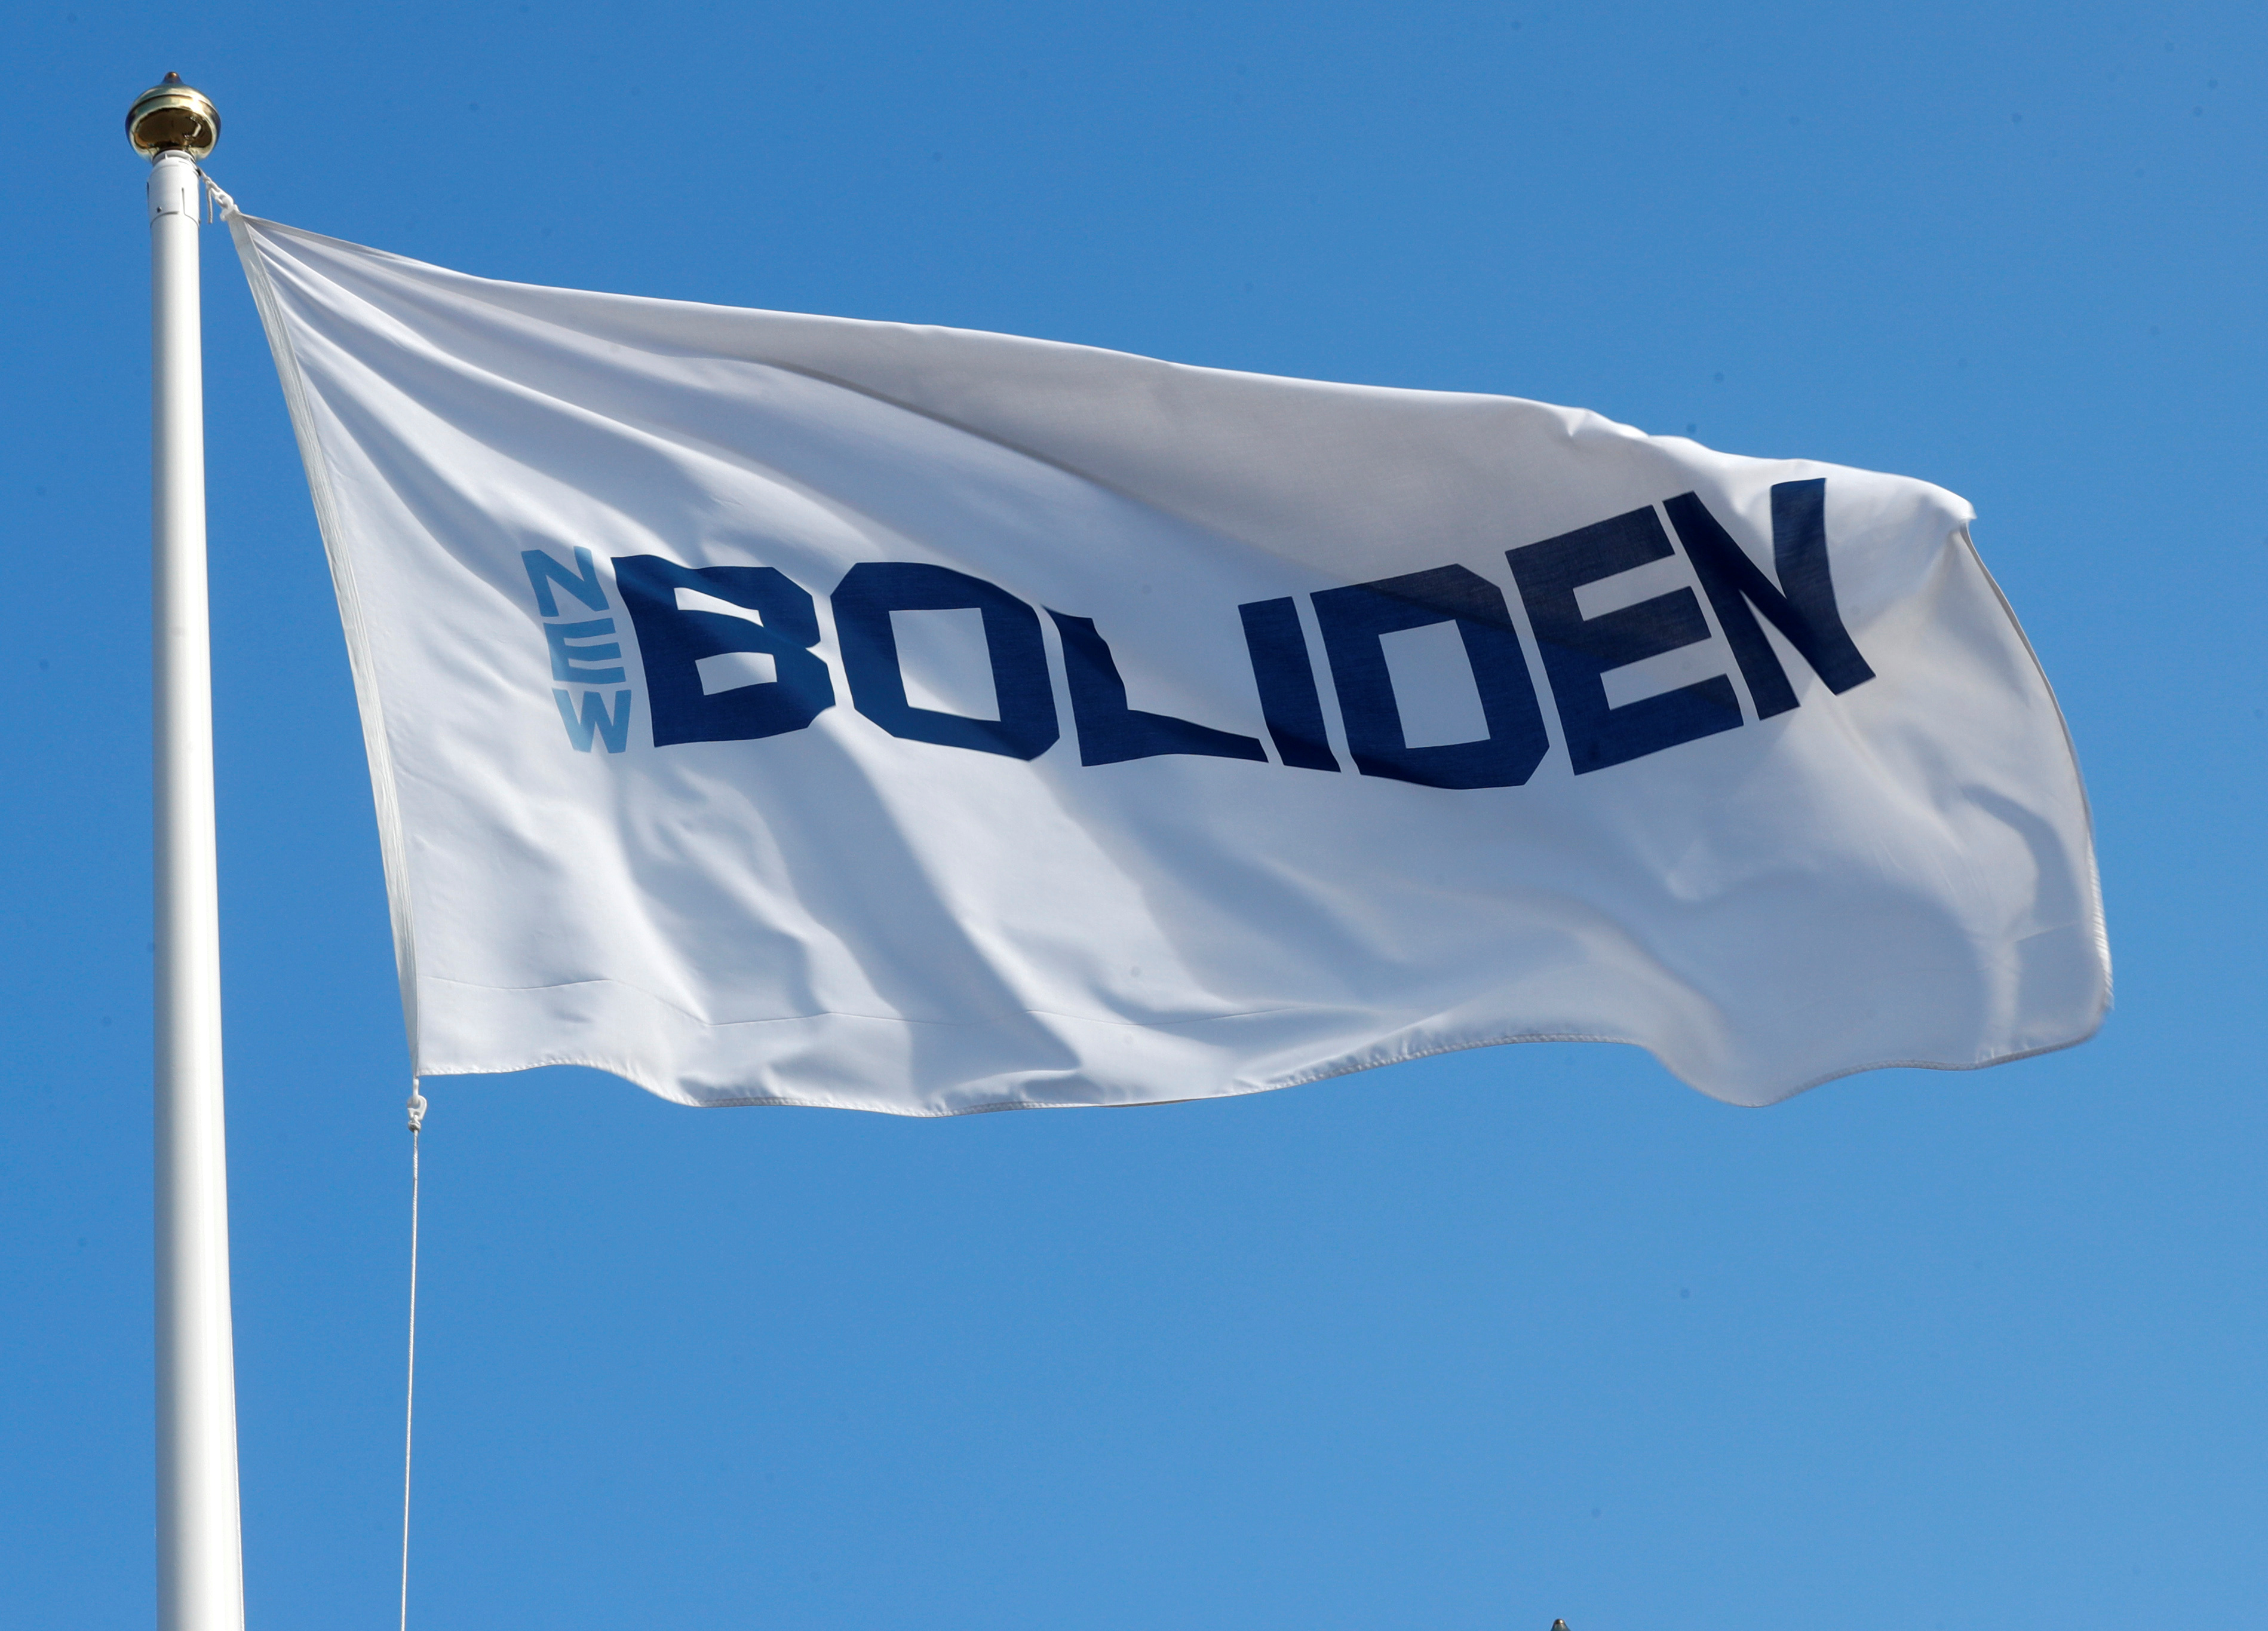 The Boliden company flag flutters next to the mine in Garpenberg